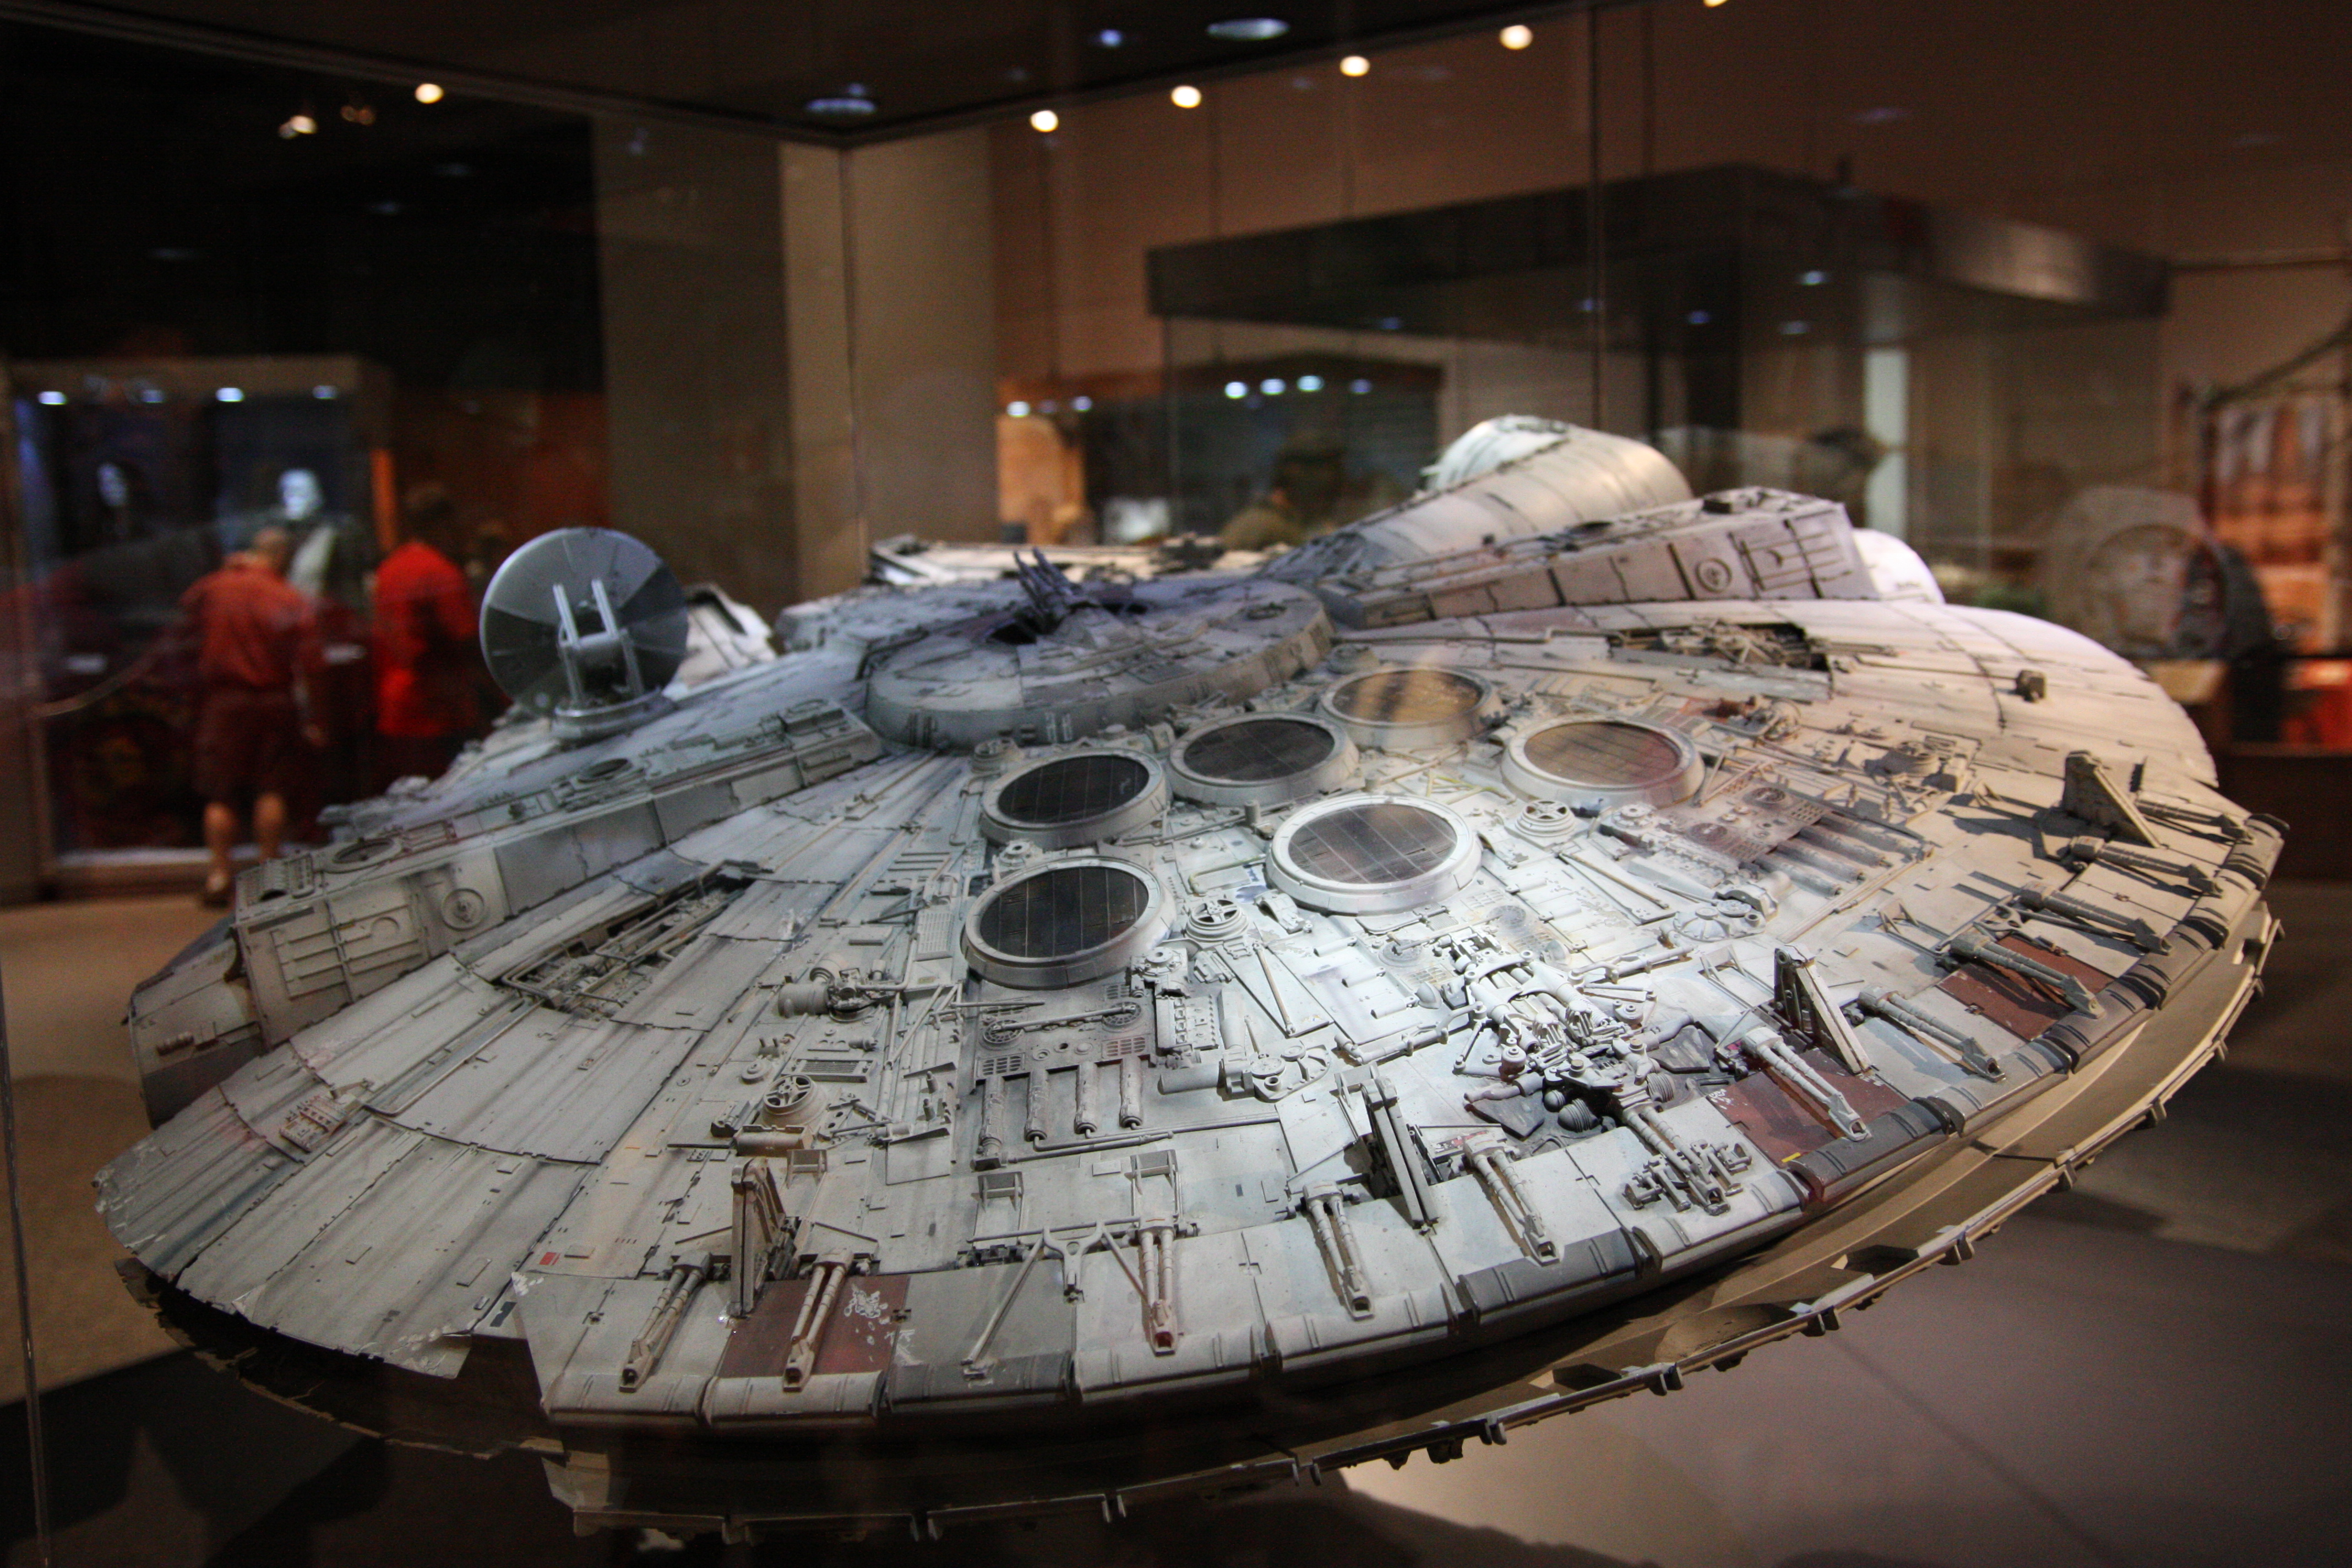 Millennium Falcon Spaceships Are Awesome